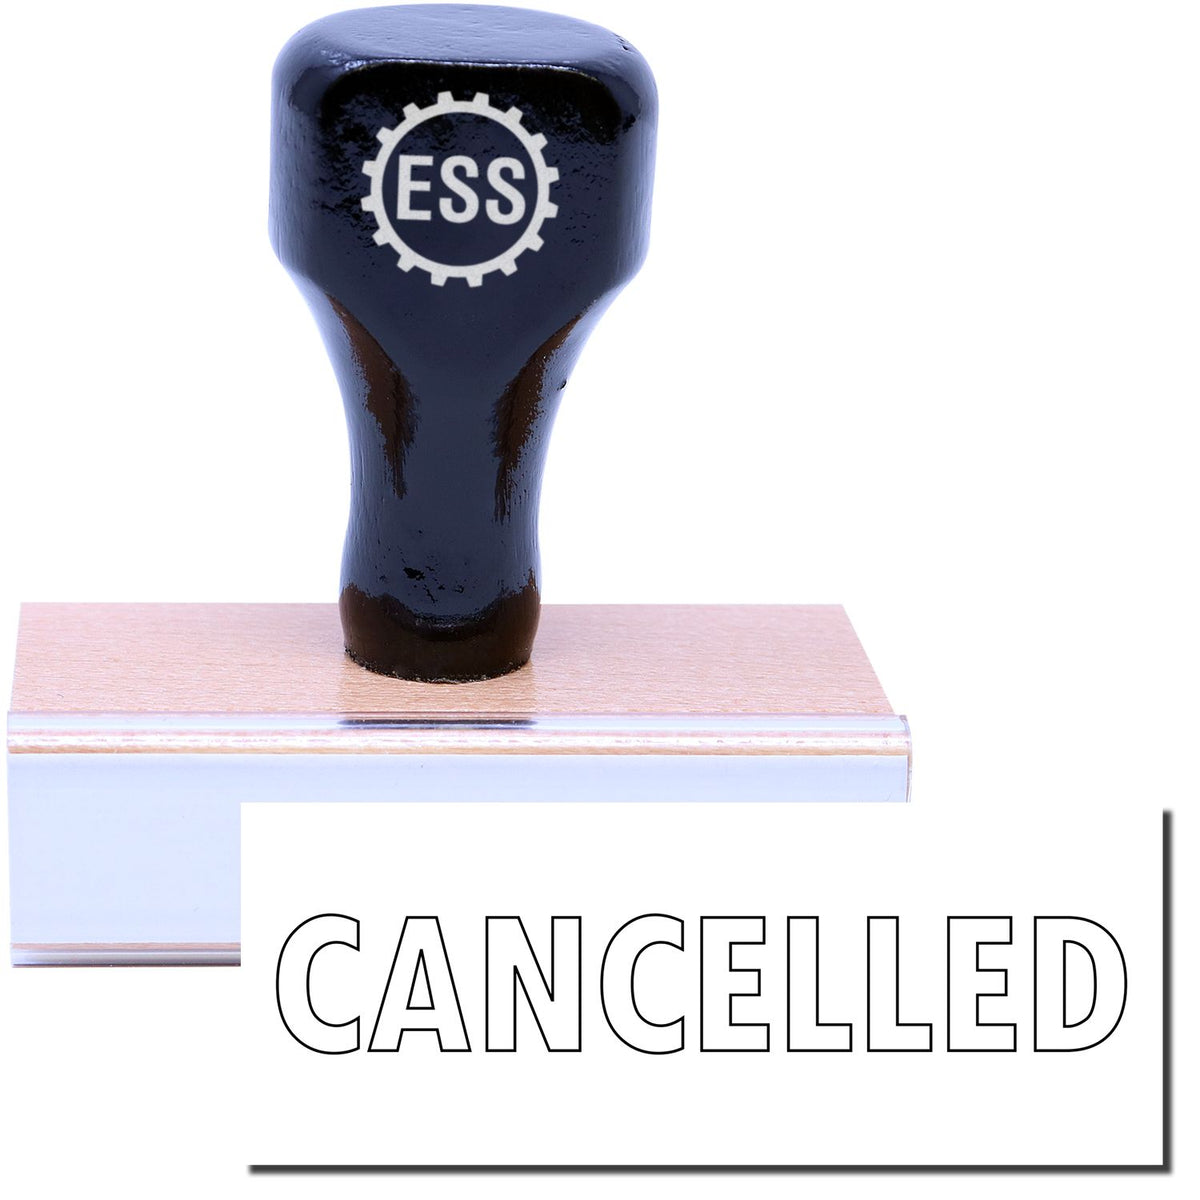 A stock office rubber stamp with a stamped image showing how the text &quot;CANCELLED&quot; in a large font and outline style is displayed after stamping.